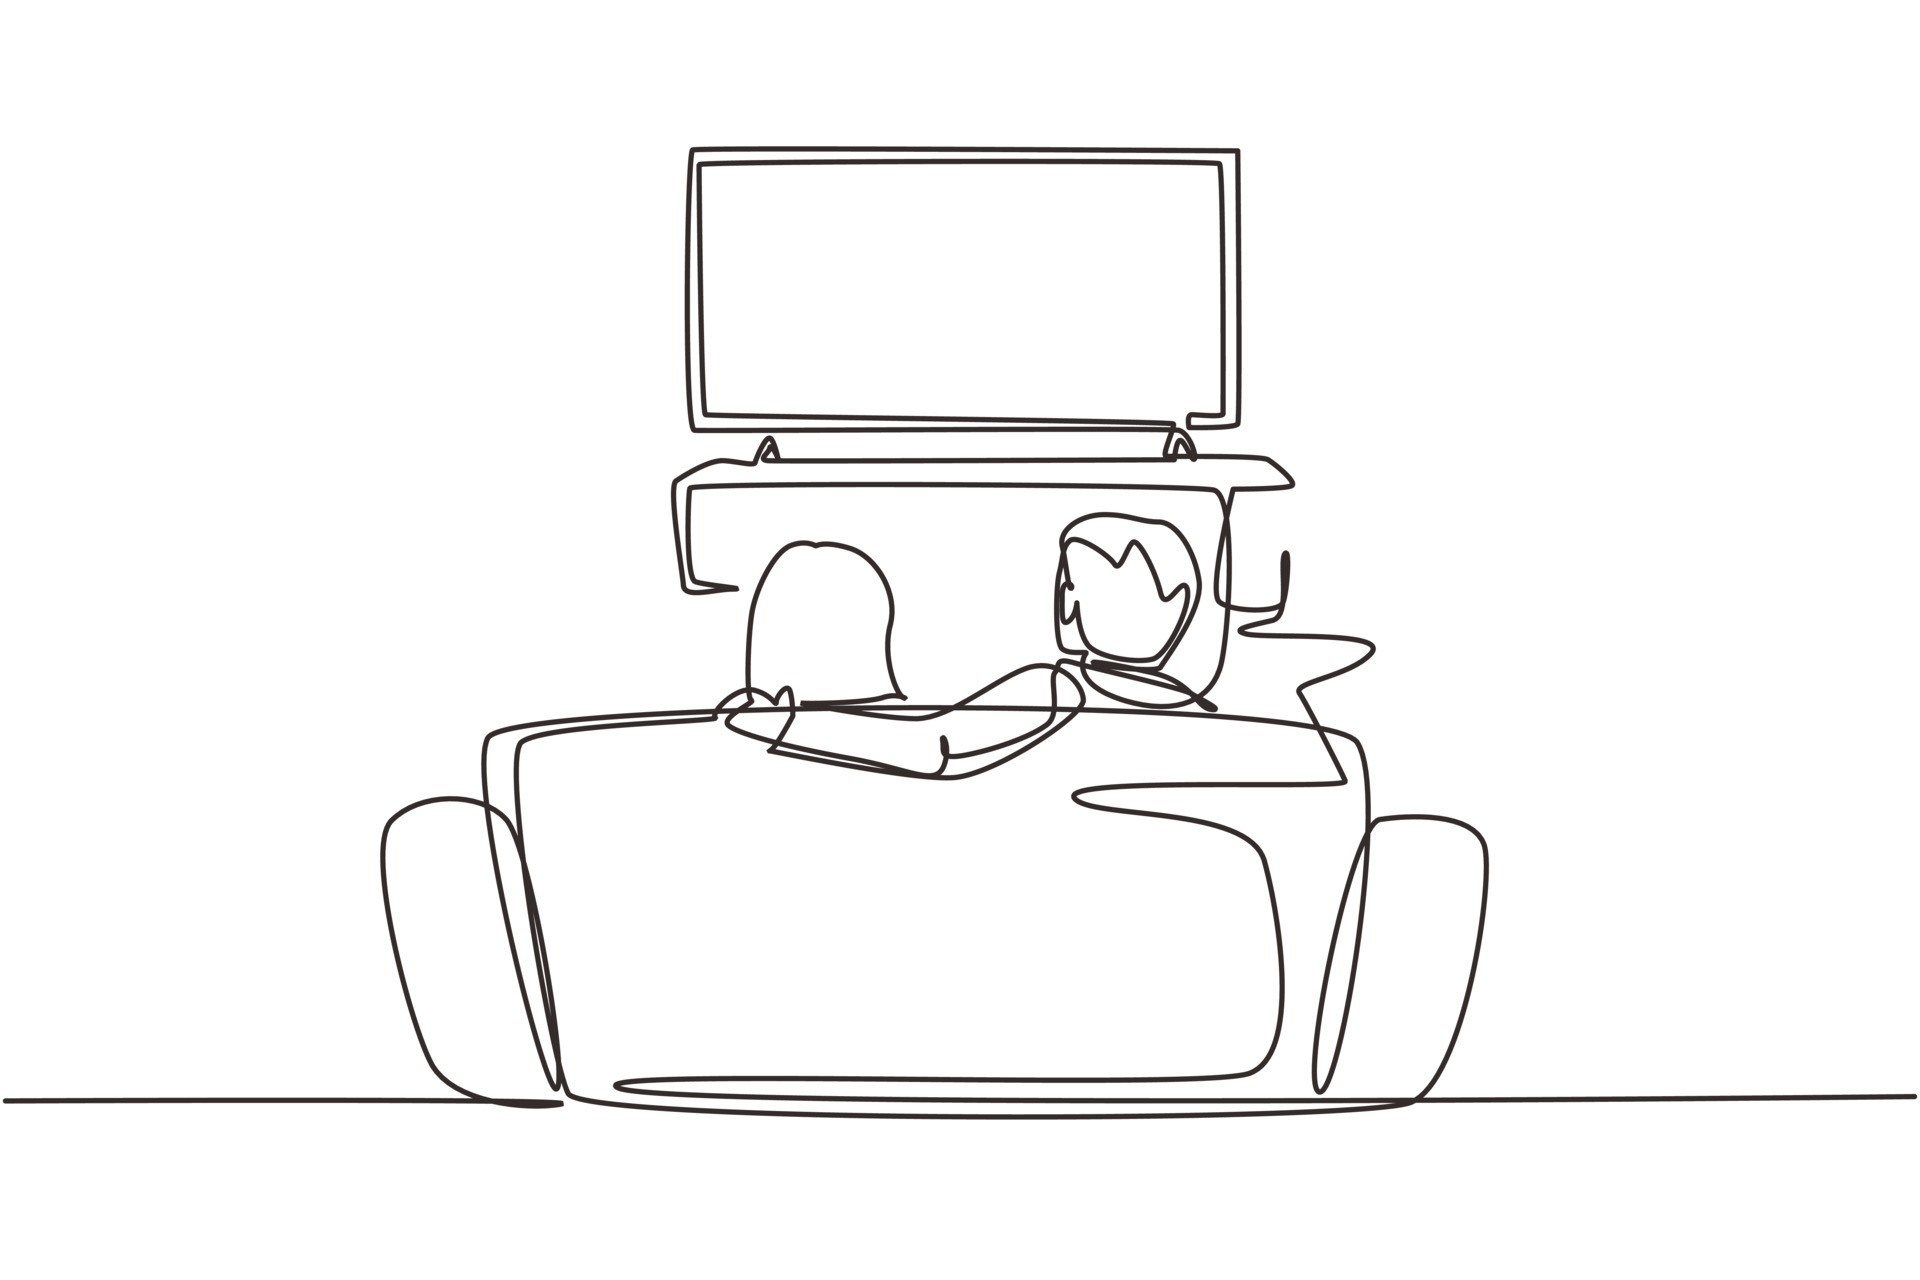 How to draw a Family members watching together TV  YouTube